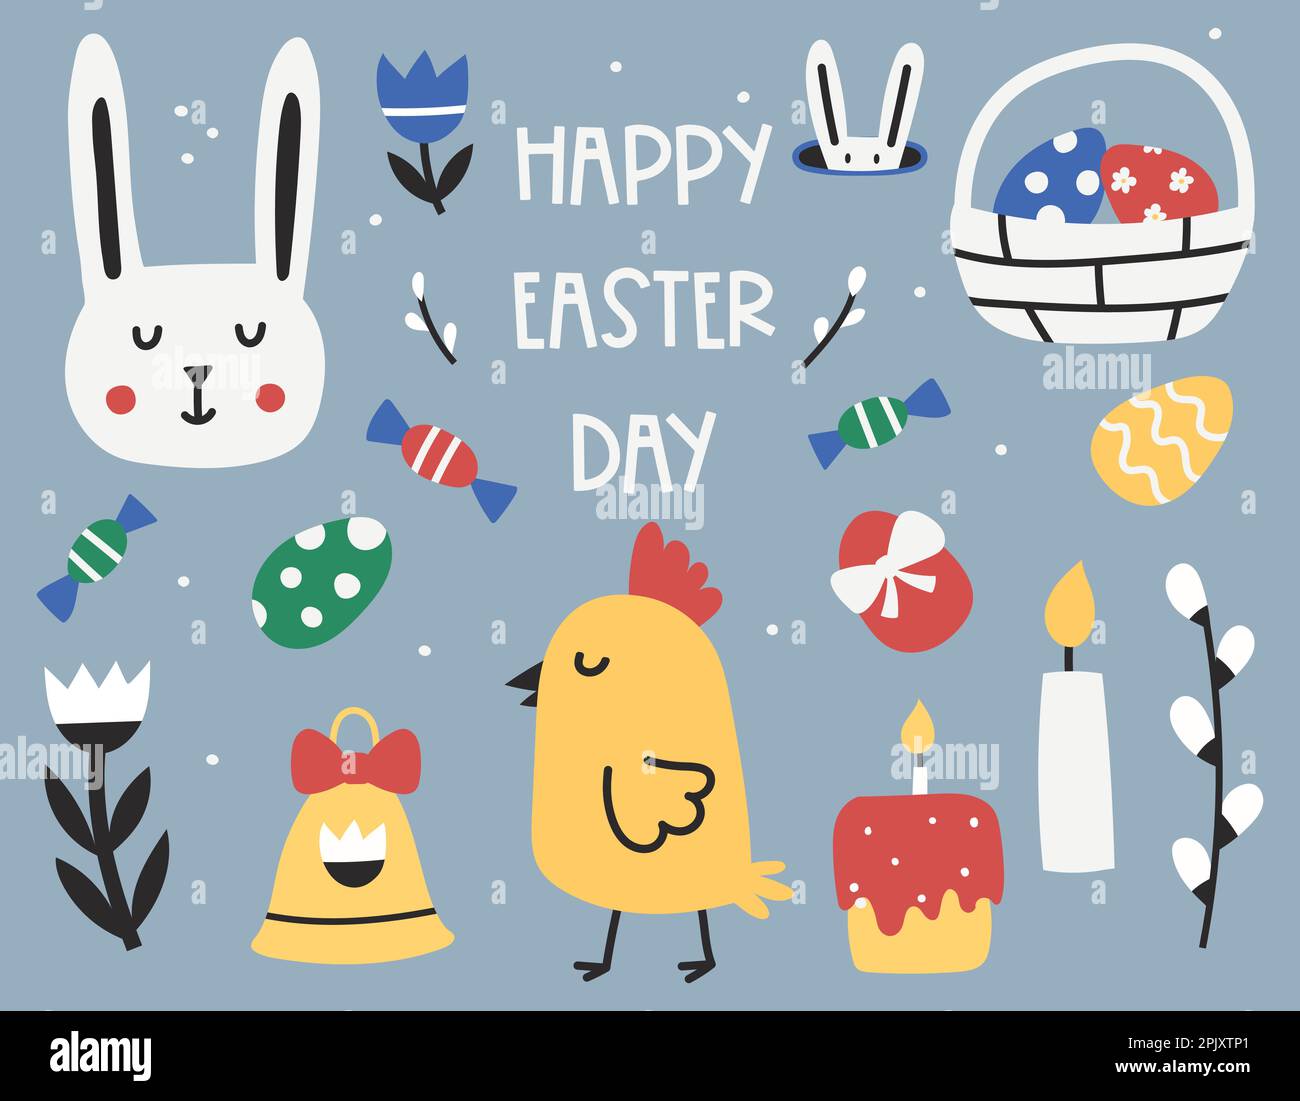 Happy Easter day. Set of simple minimal Easter design elements ...